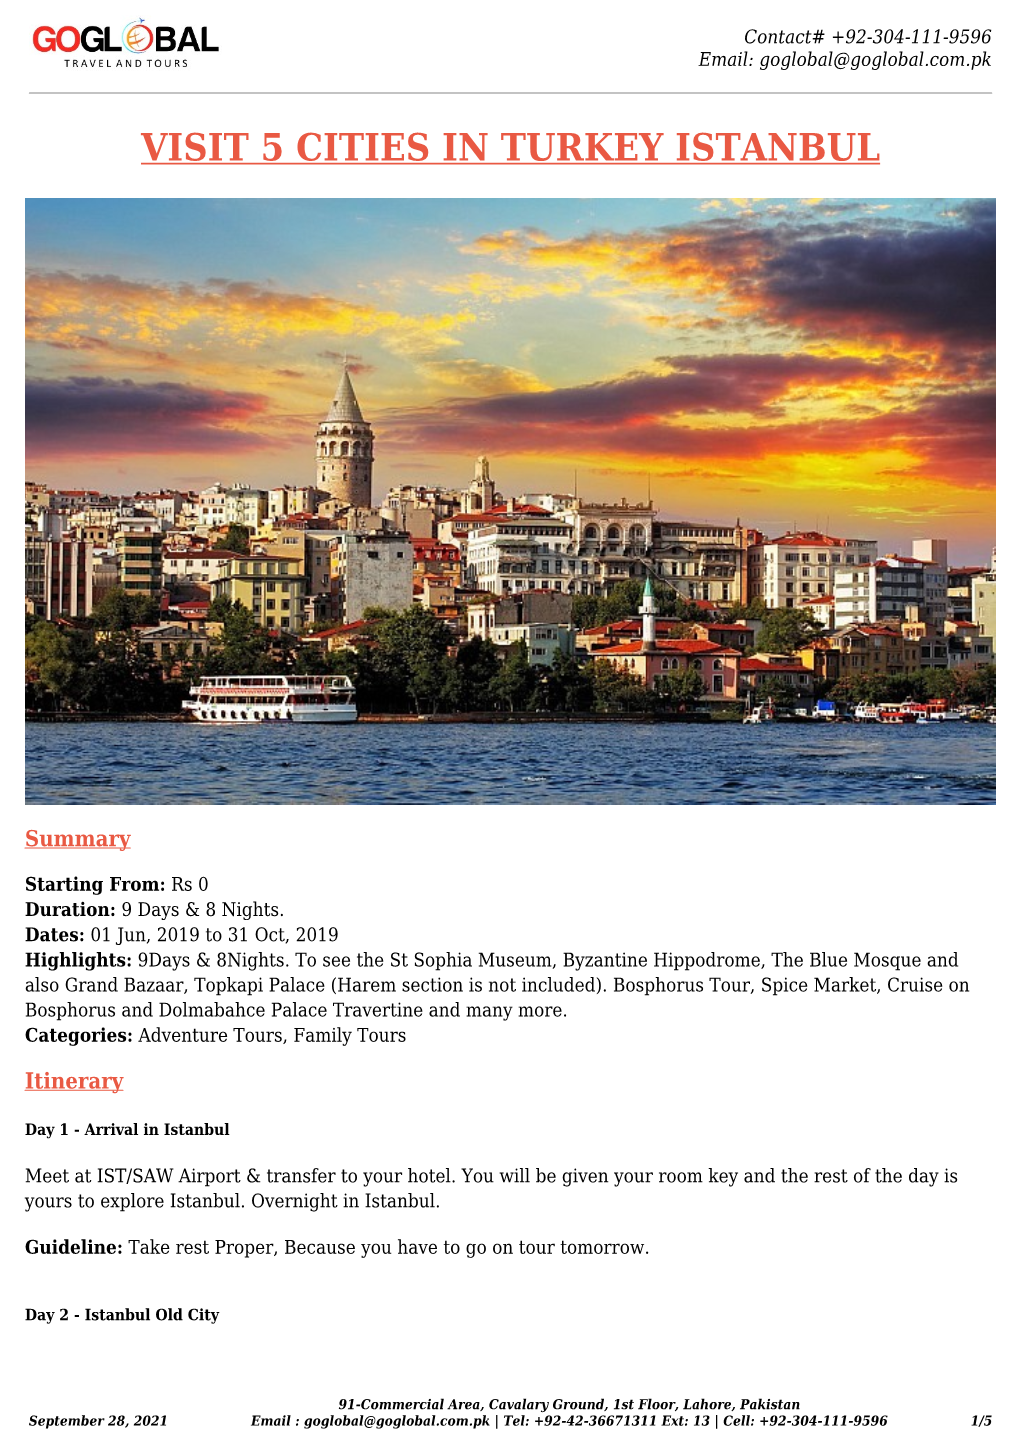 Visit 5 Cities in Turkey Istanbul